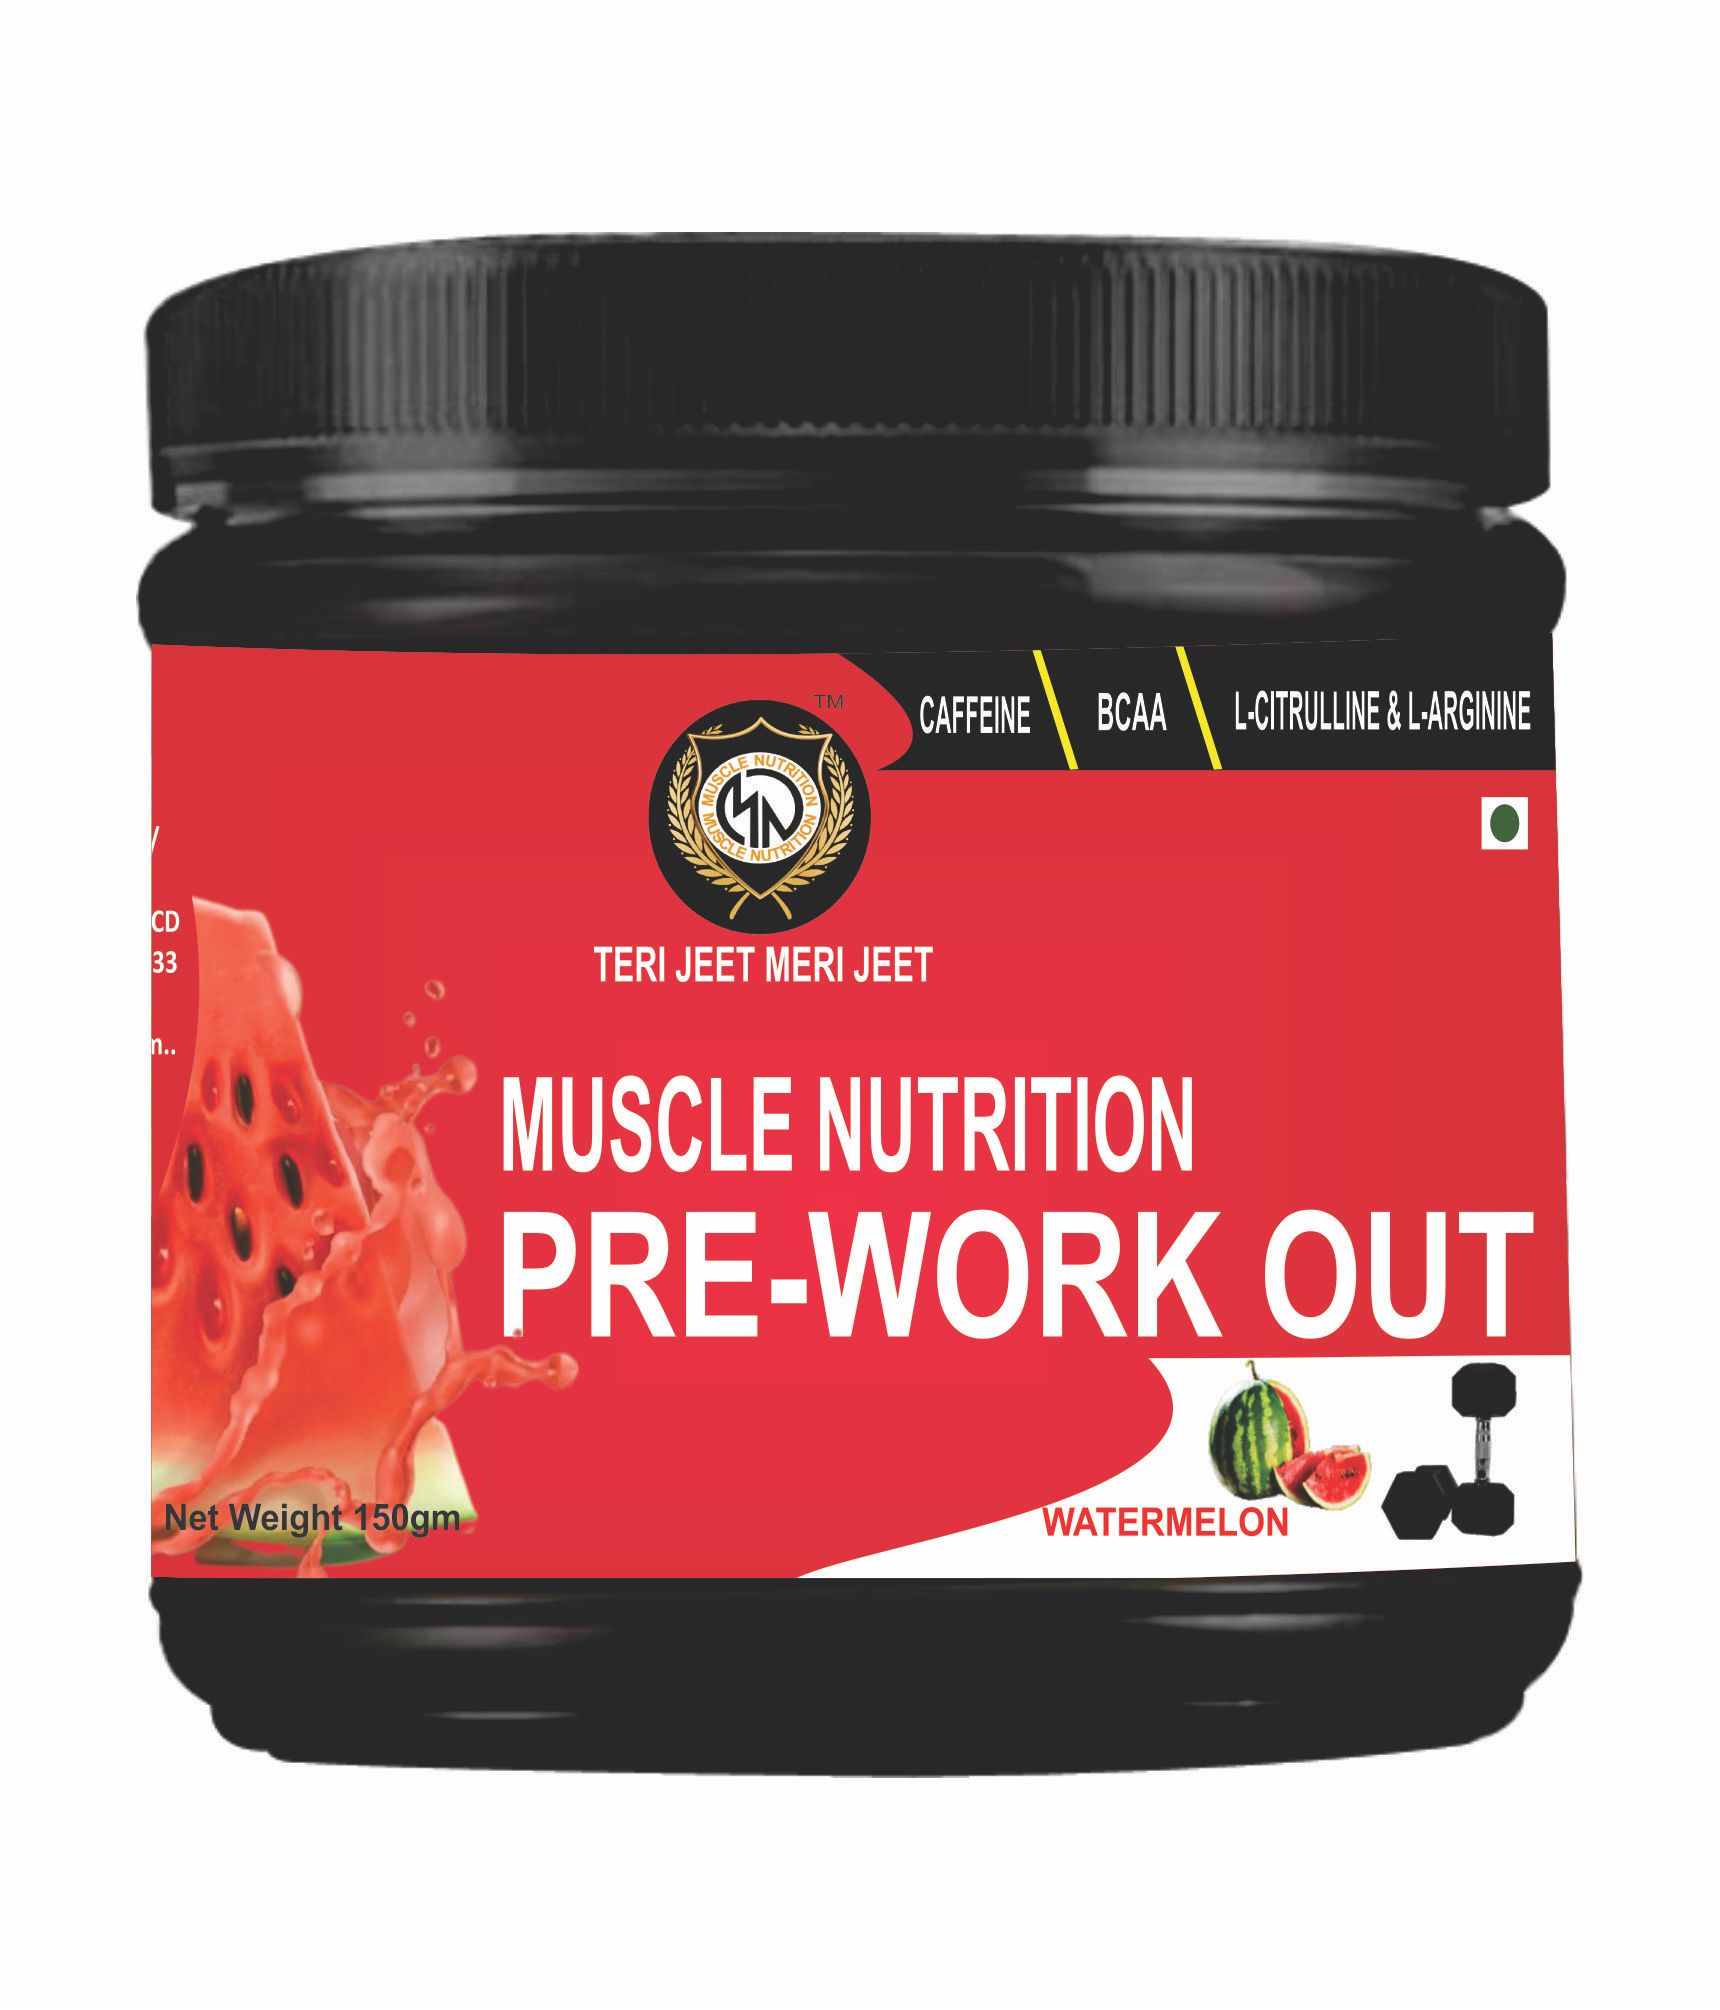 Buy Muscle Nutrition Pre-workout (150g), Watermelon Supplements online at Best Price in India